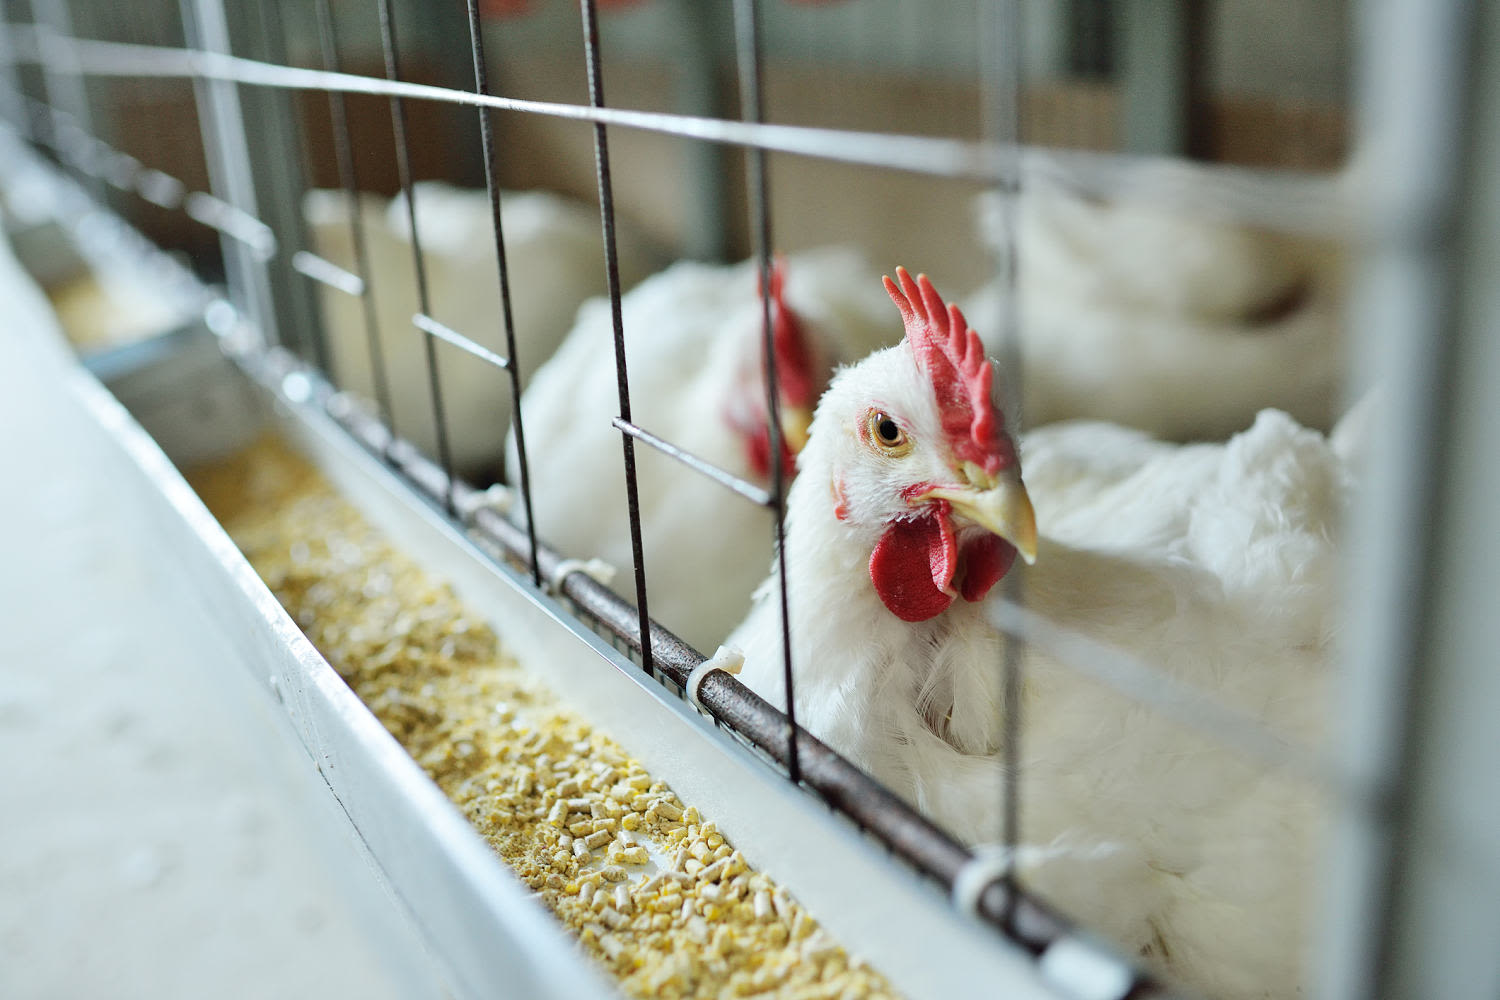 4th human bird flu case confirmed in US: What are the symptoms?